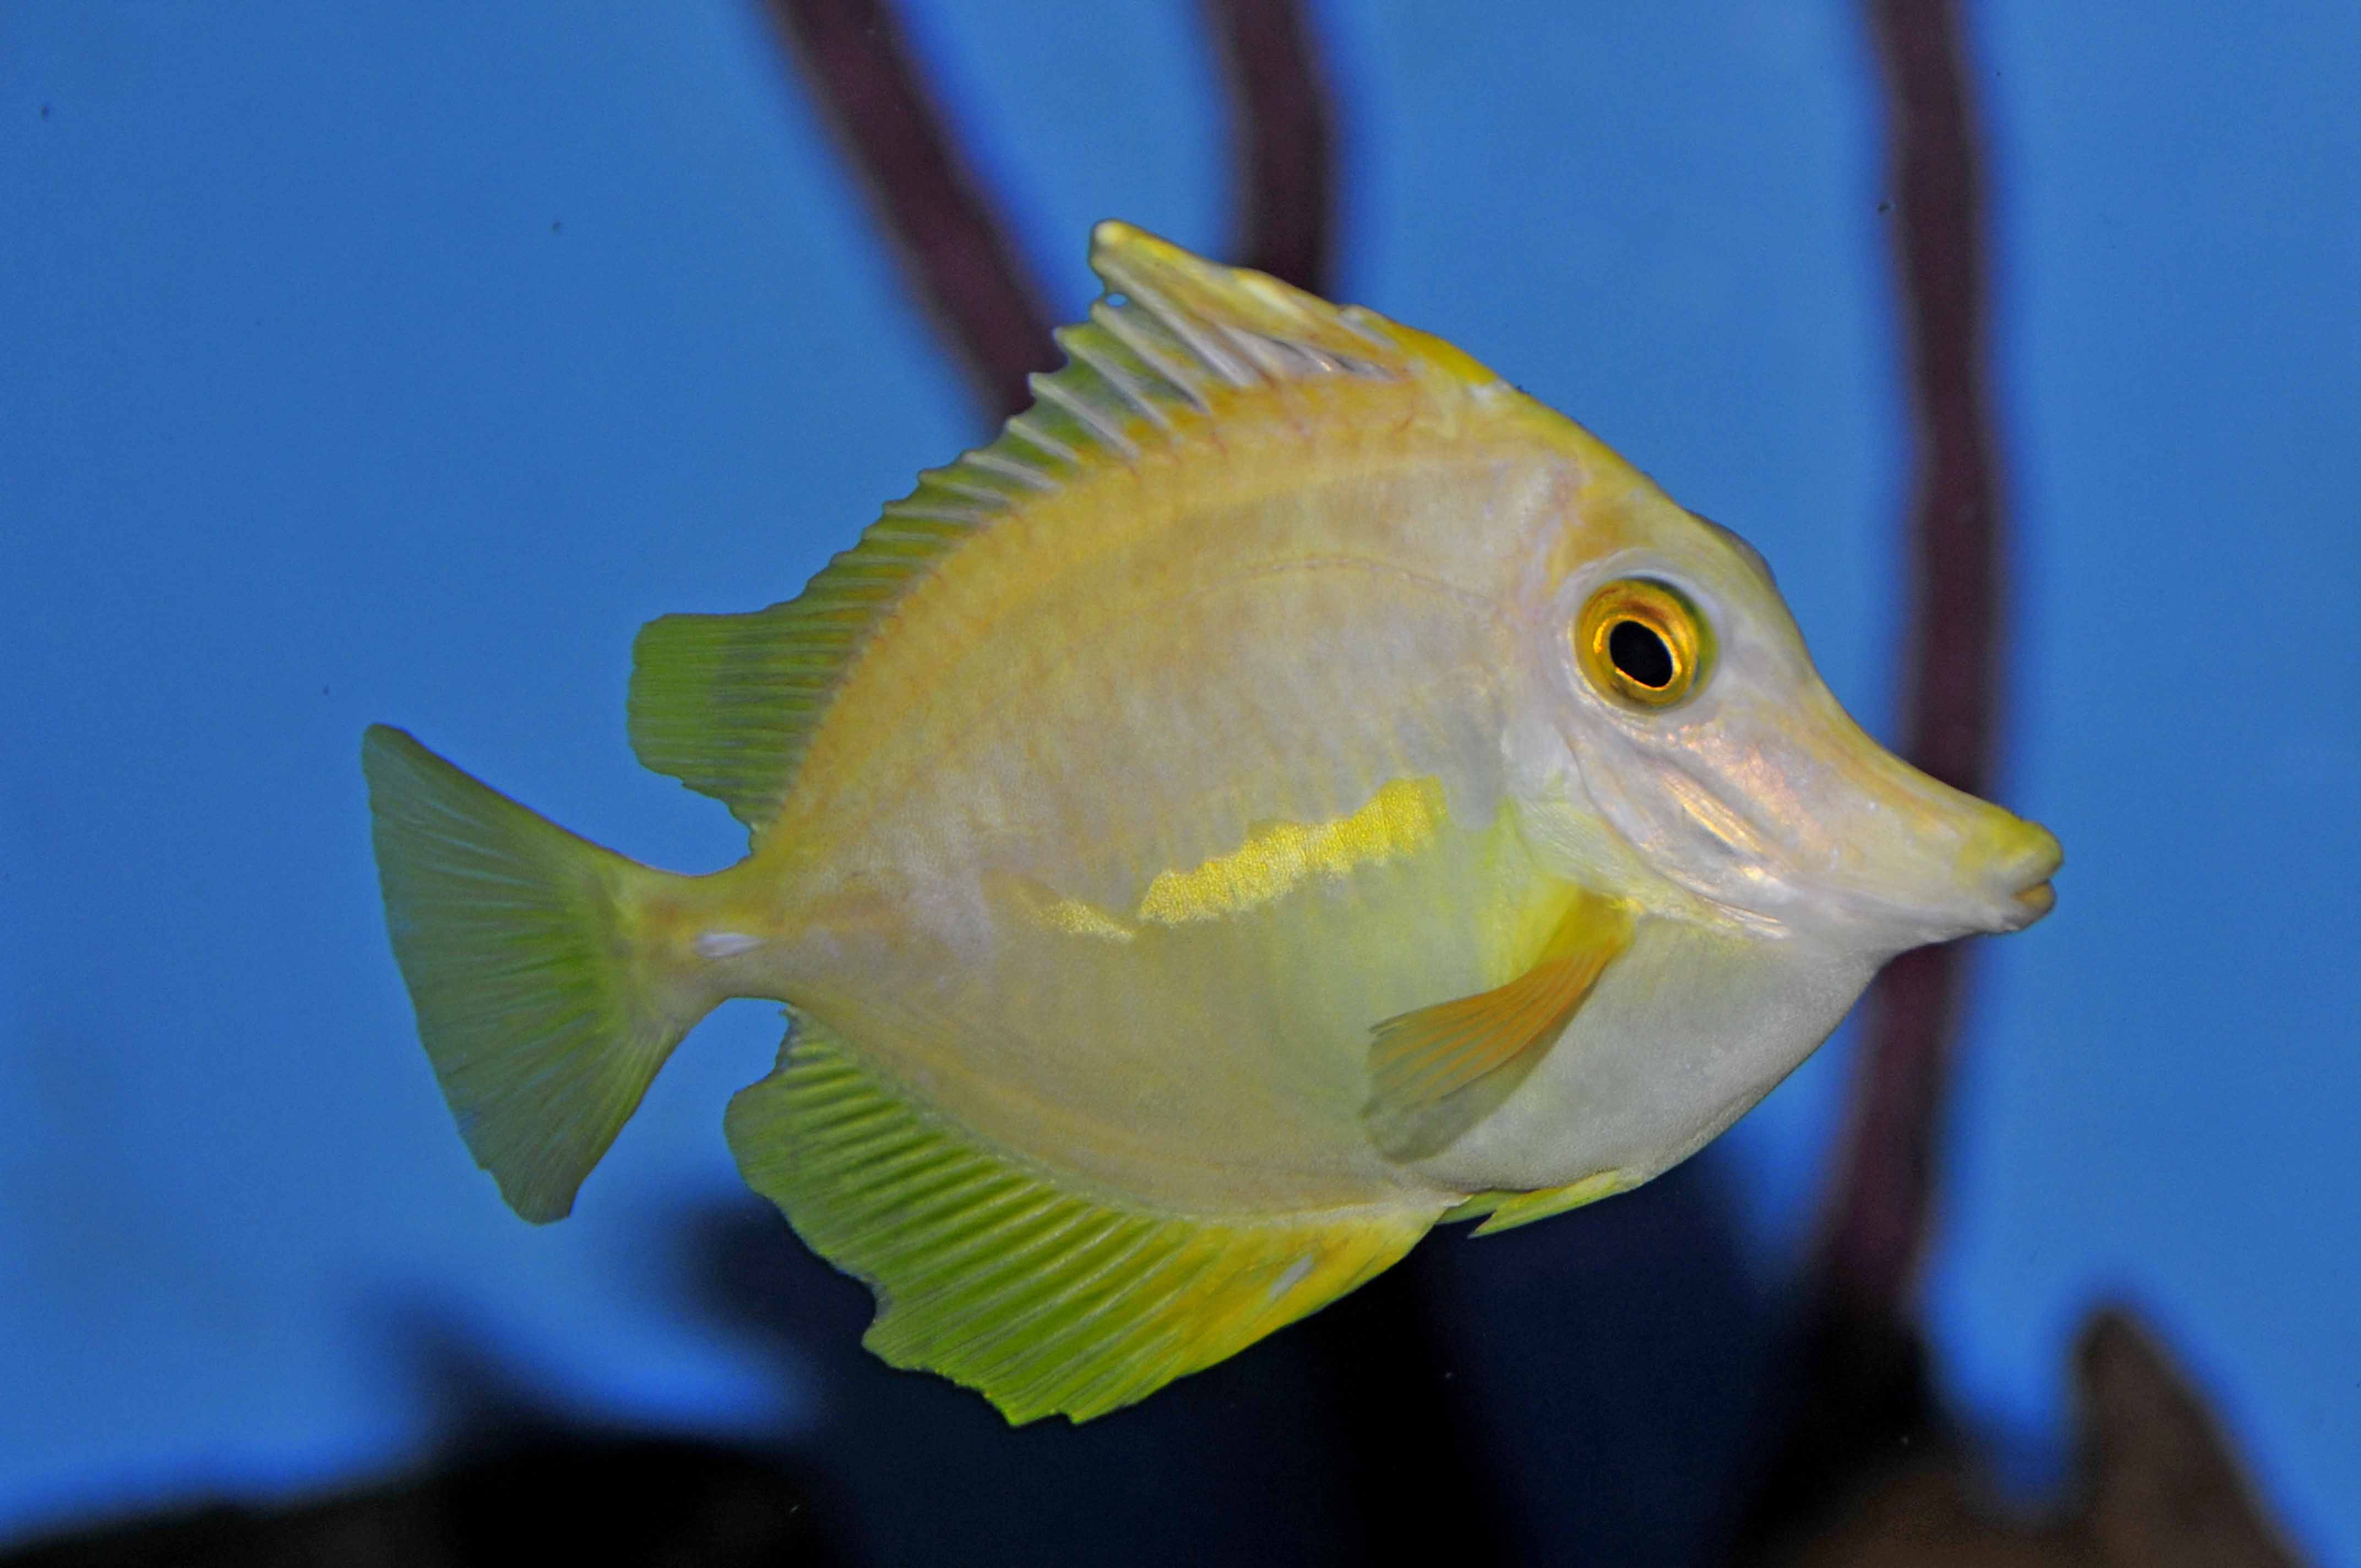 Atypical-HLLE-in-a-yellow-tang-fin-erosion-is-the-primary-symptom.jpg